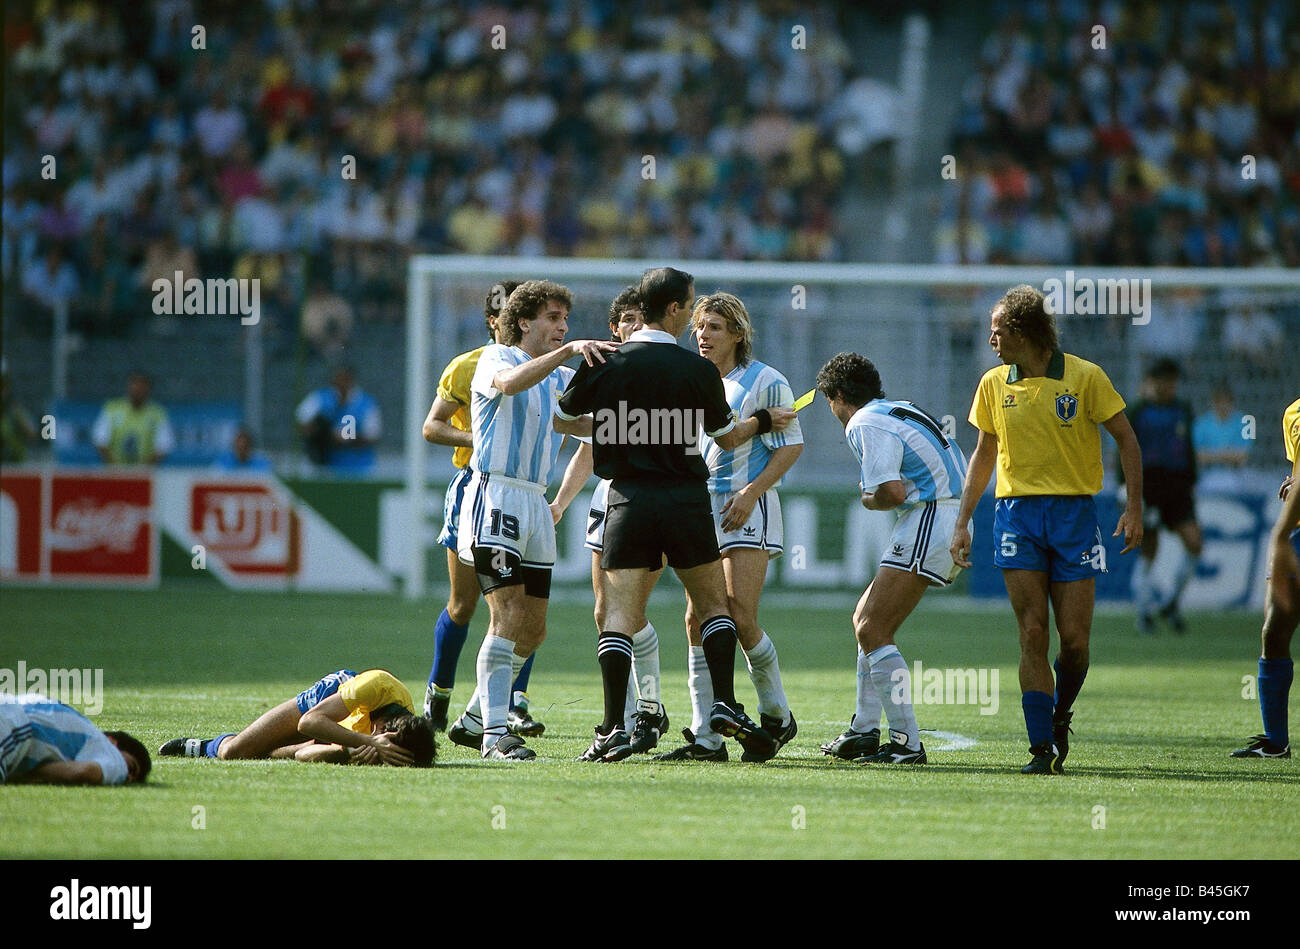 Sport / Sports, soccer, football, World Cup 1990, final round, last sixteen, Brasililen against Argentina, (0:1) in Turin, Italy, 24.6.1990, scene, referee, yellow card, foul, match, historic, historical, 20th century, people, 1990s, Stock Photo